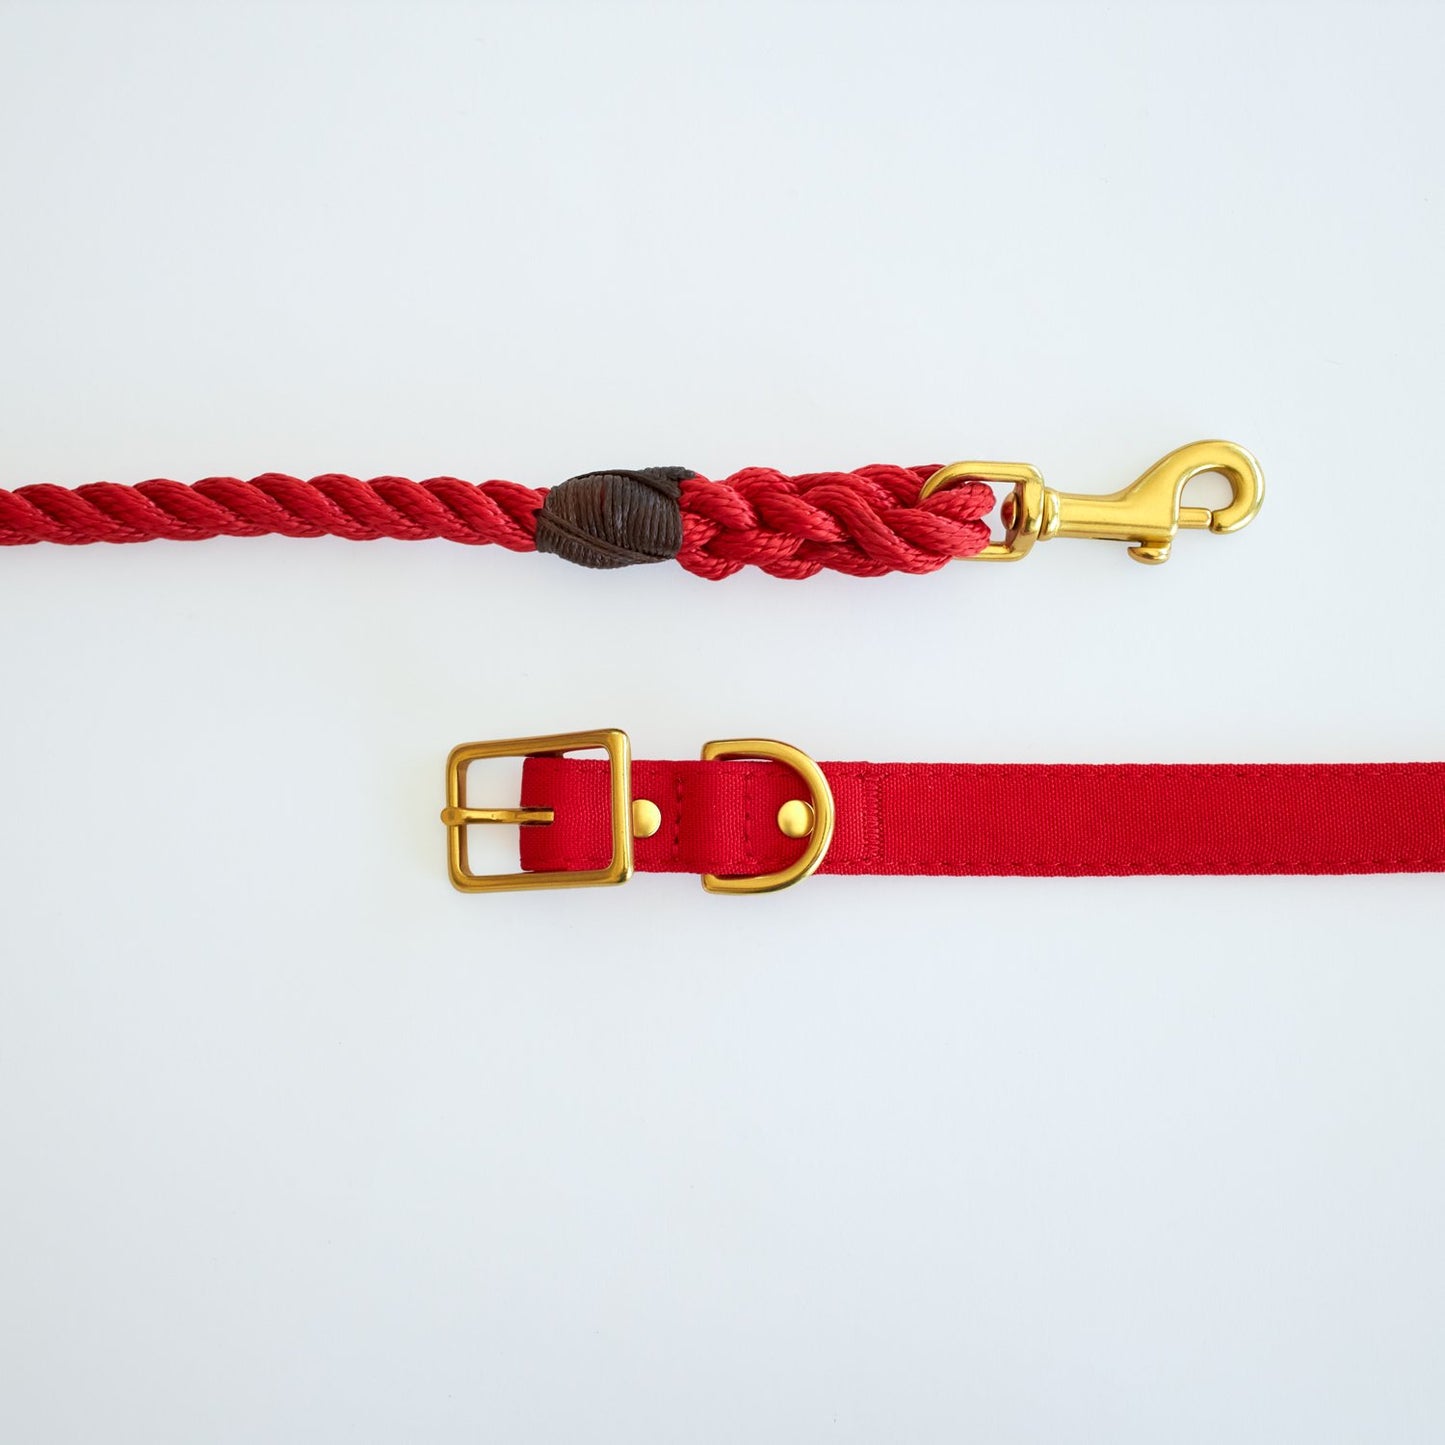 All Weather Dog Leashes